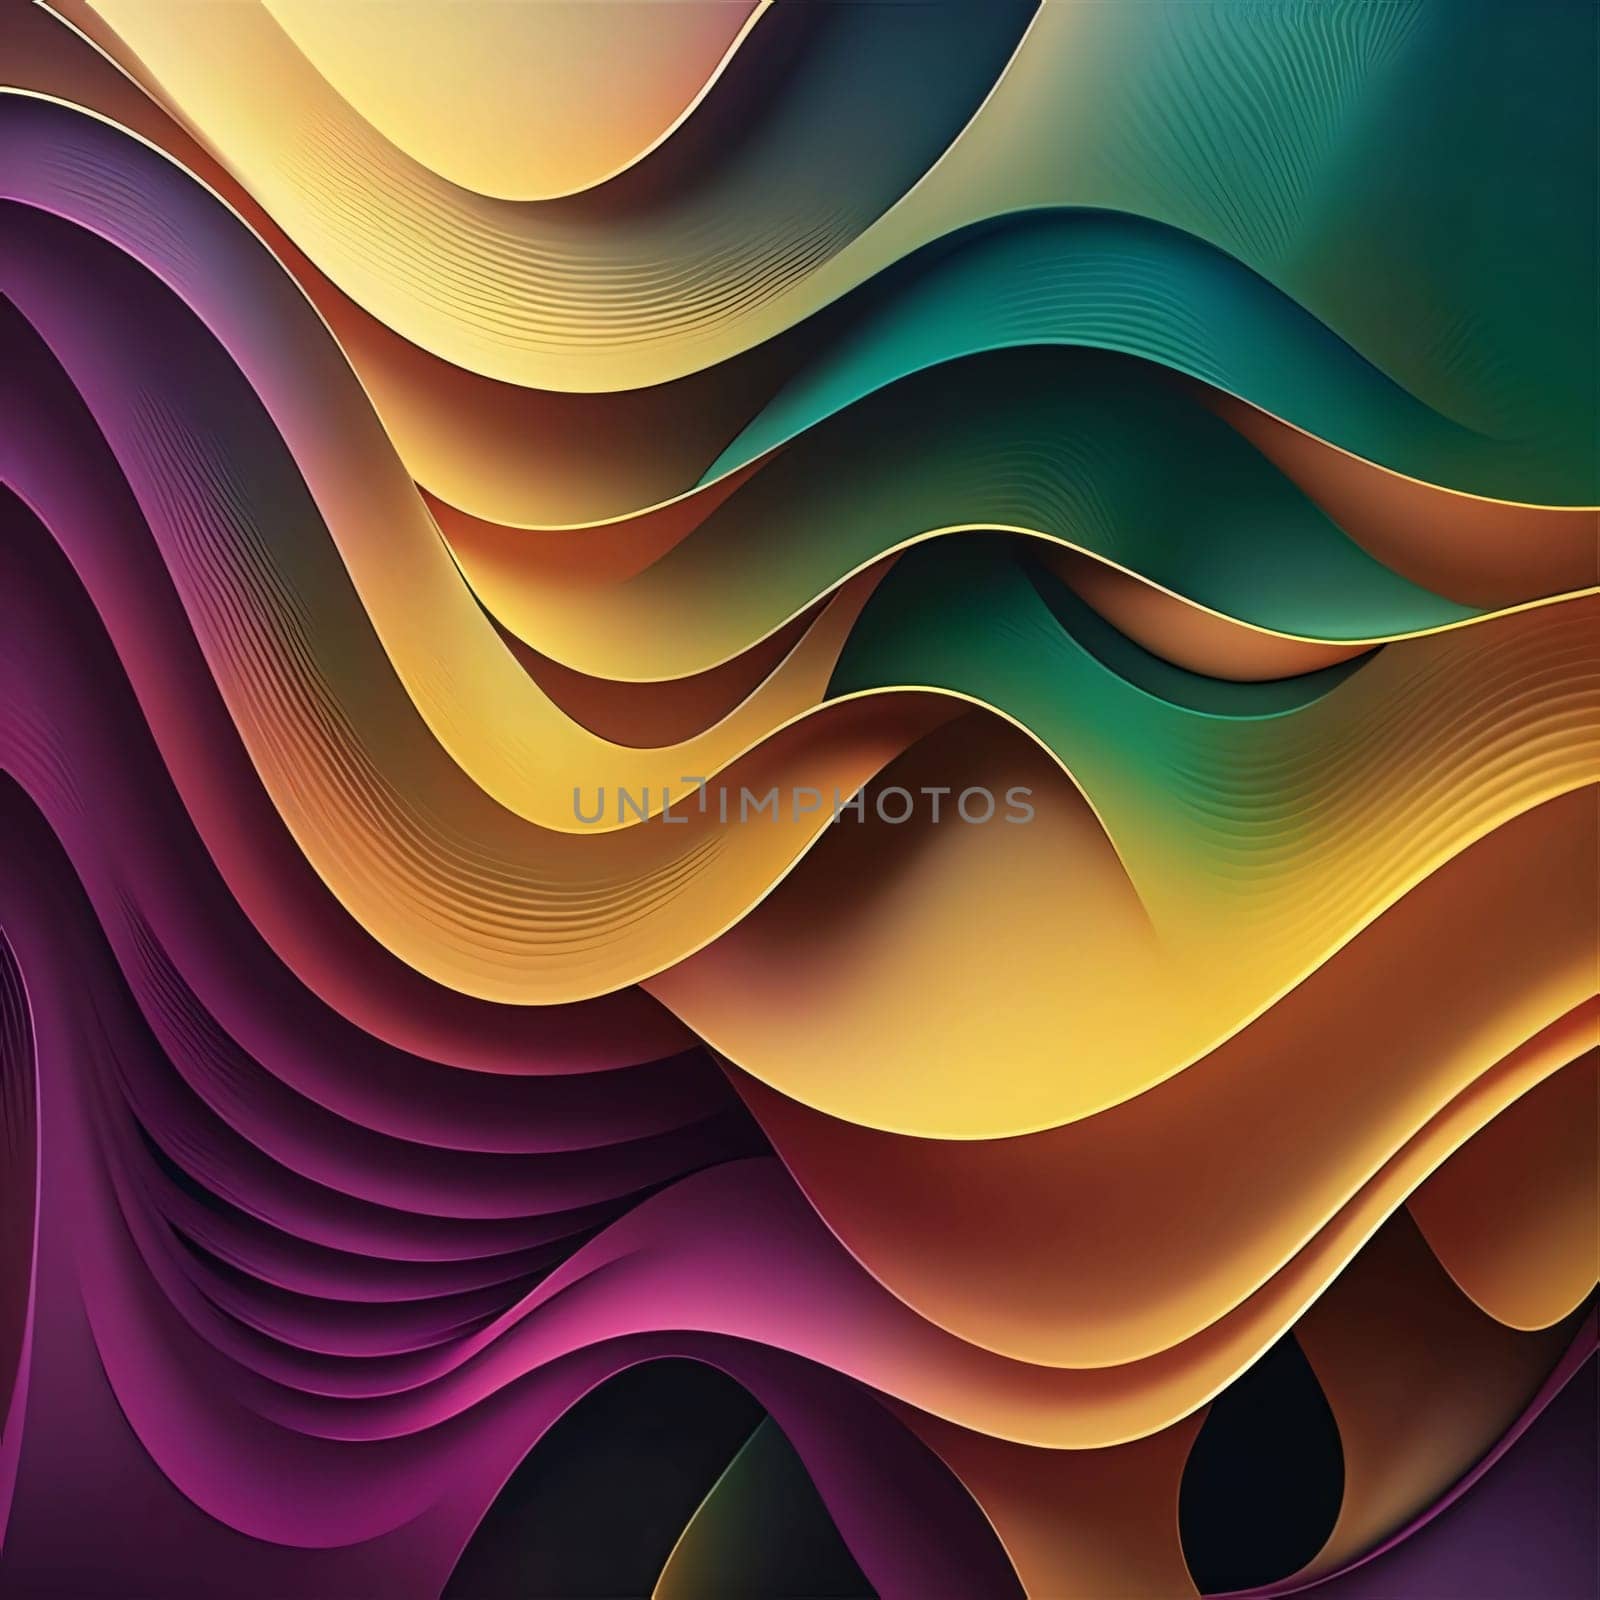 Abstract background design: abstract background with colorful waves. Vector illustration. Eps 10.